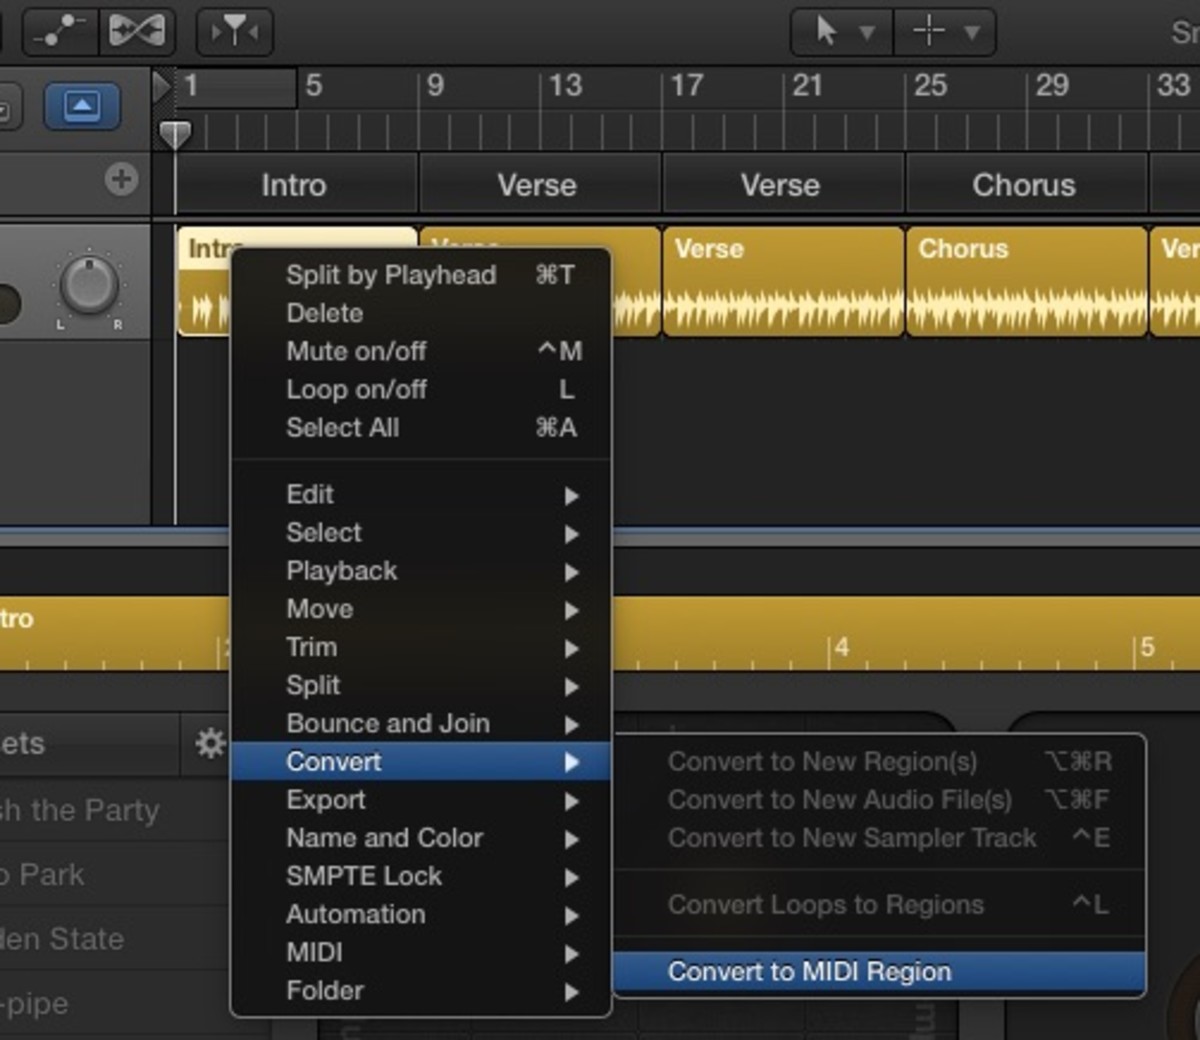 [ctrl-click] on a drummer to bring up this shortcut menu, and then click Convert to MIDI Region to make the drum track editable in the piano roll 